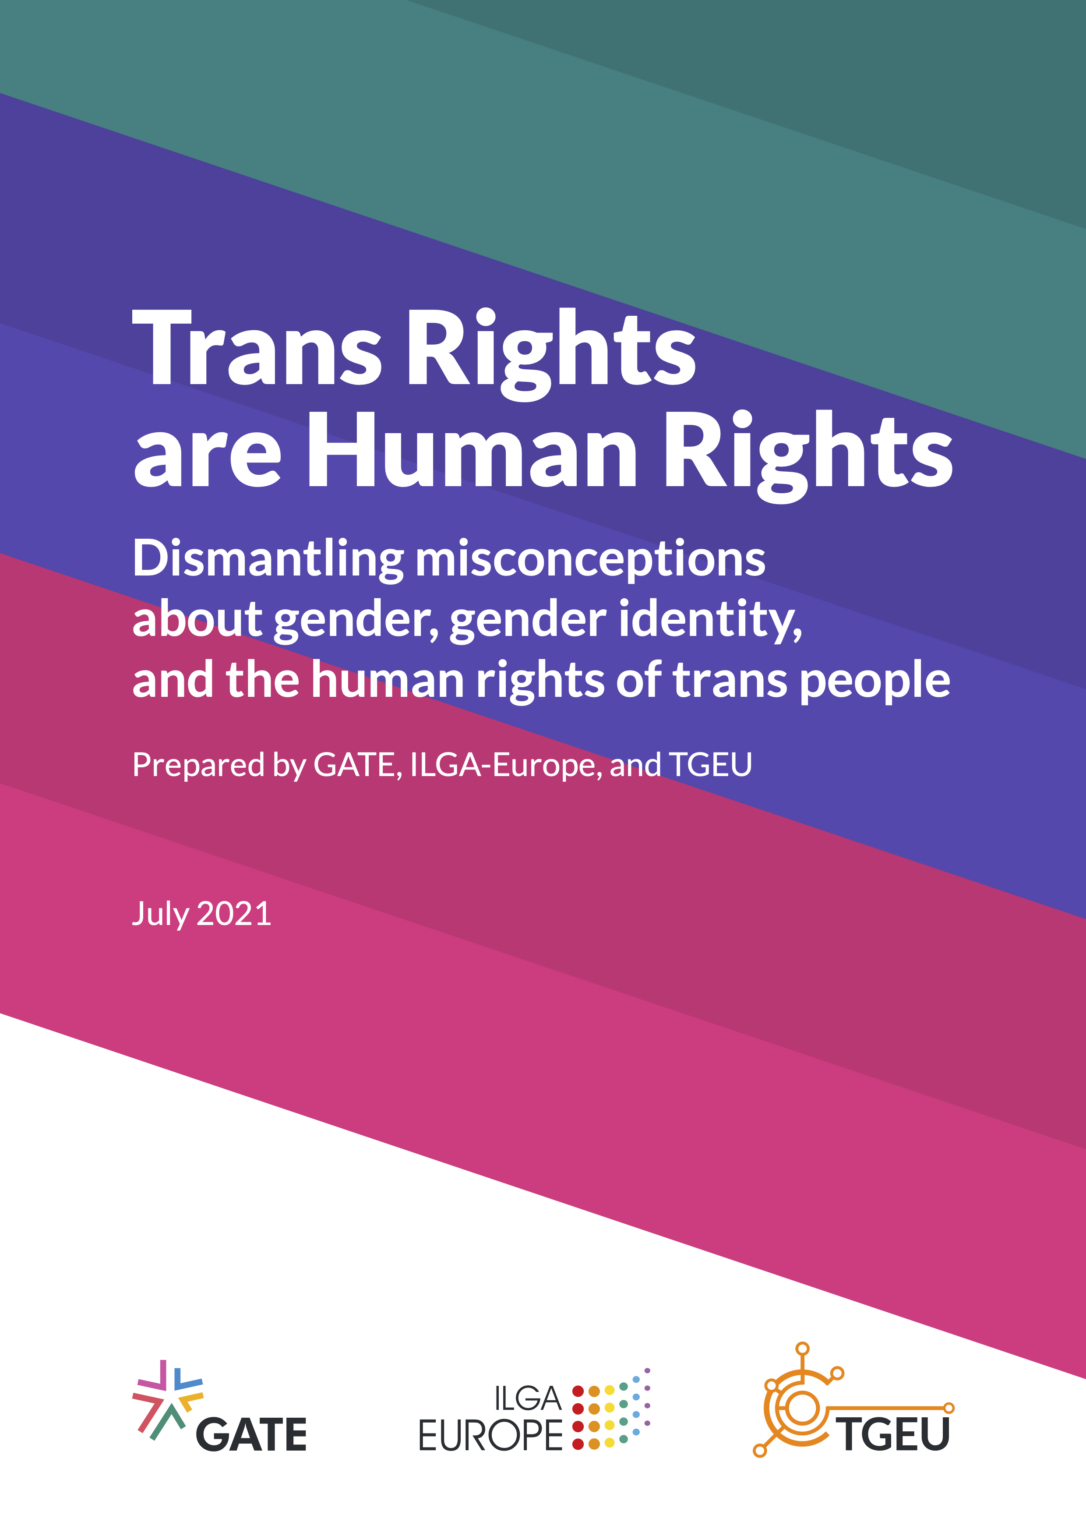 Trans Rights are Human Rights: Dismantling misconceptions about gender, gender identity, and the human rights of trans people